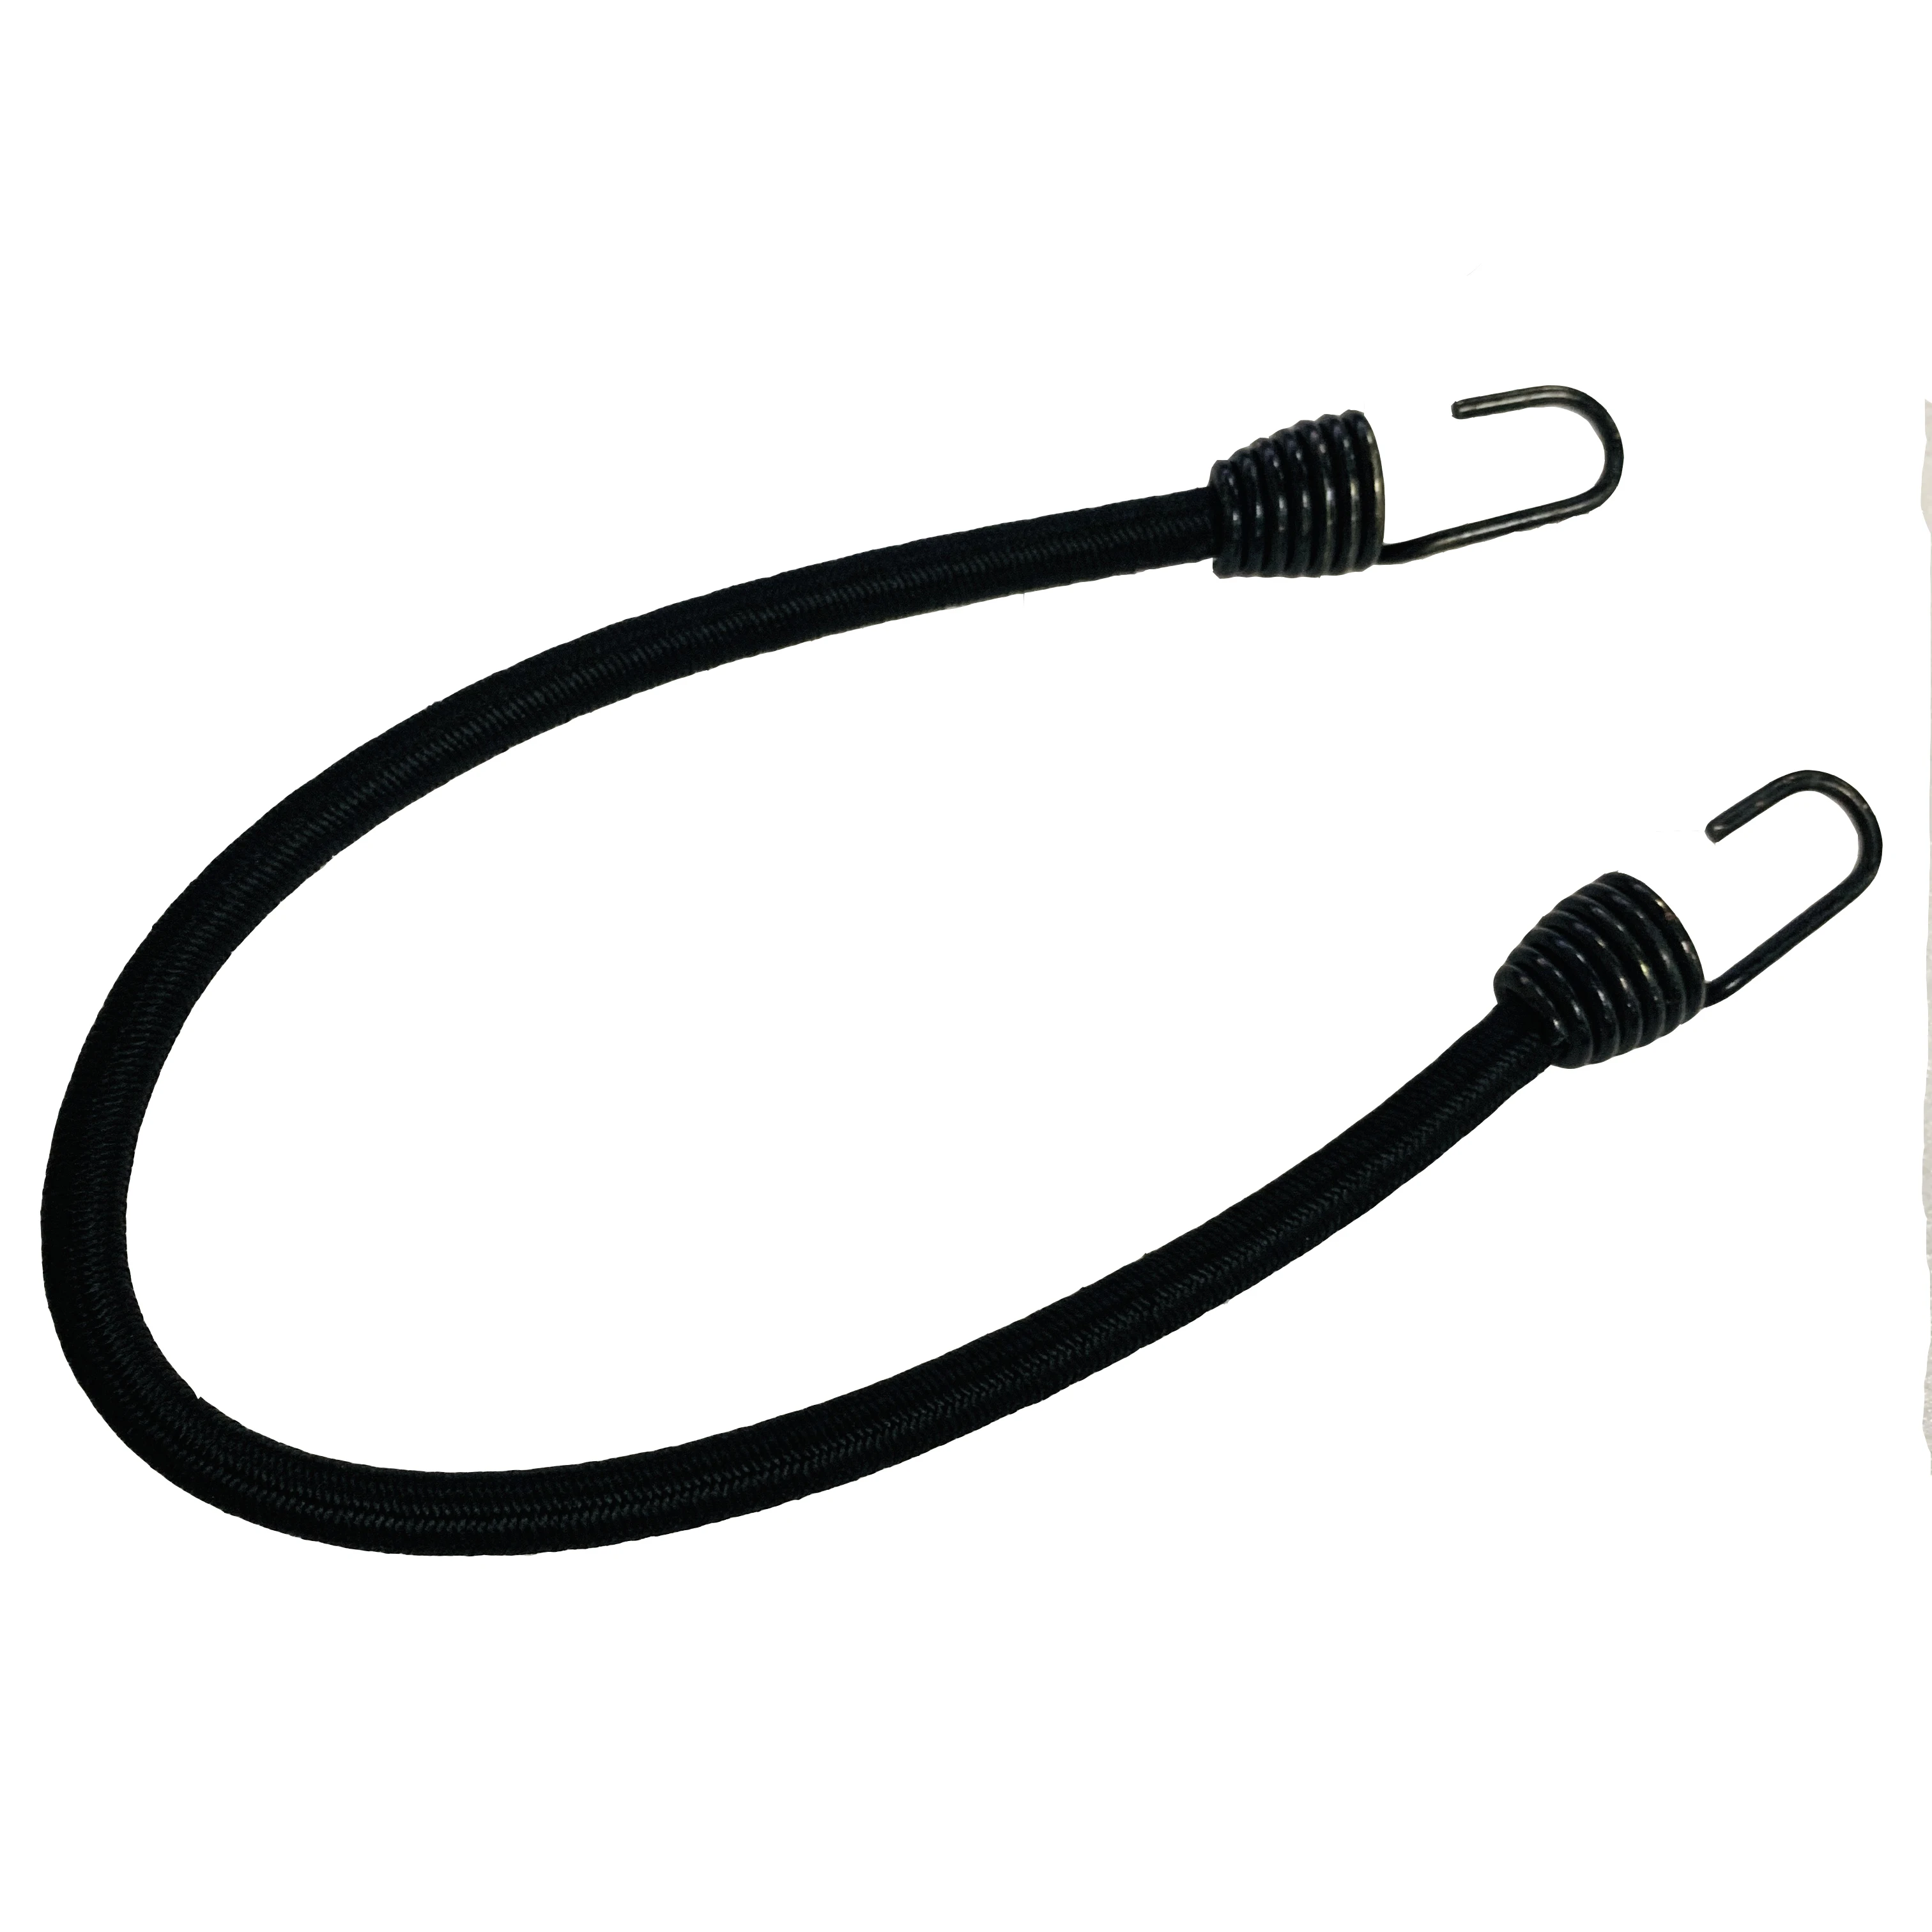 High strength rubber bungee cord with metal carabiner hook Bicycle bungee rope